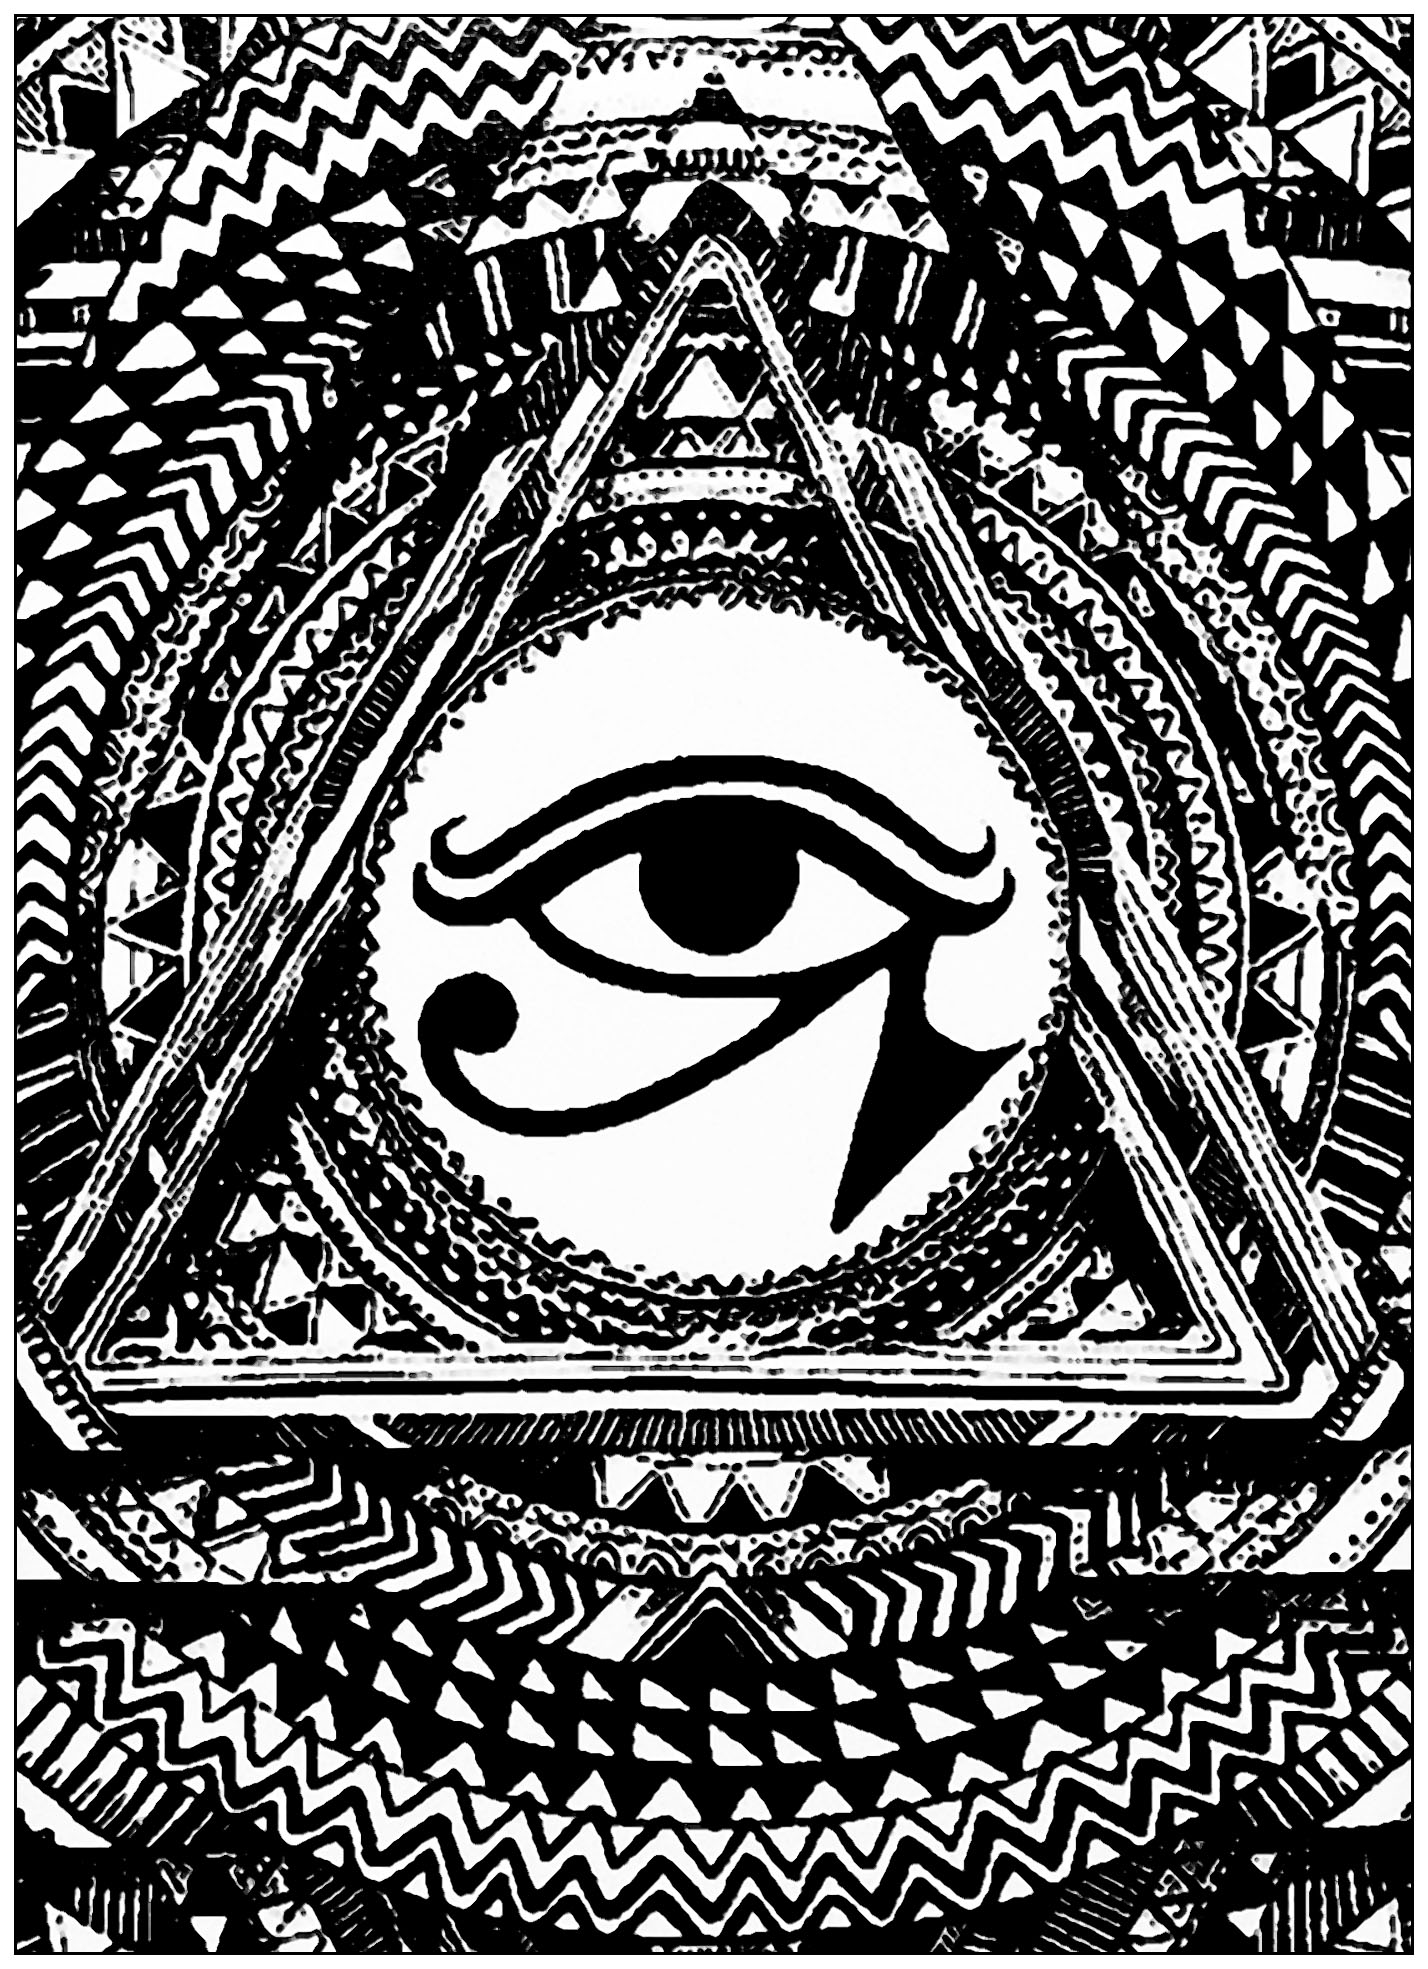 Eye of Horus in a triangle. The Eye of Horus was used as a sign of prosperity and protection, derived from the myth of Isis and Osiris. This symbol has an astonishing connection between neuroanatomical structure and function.